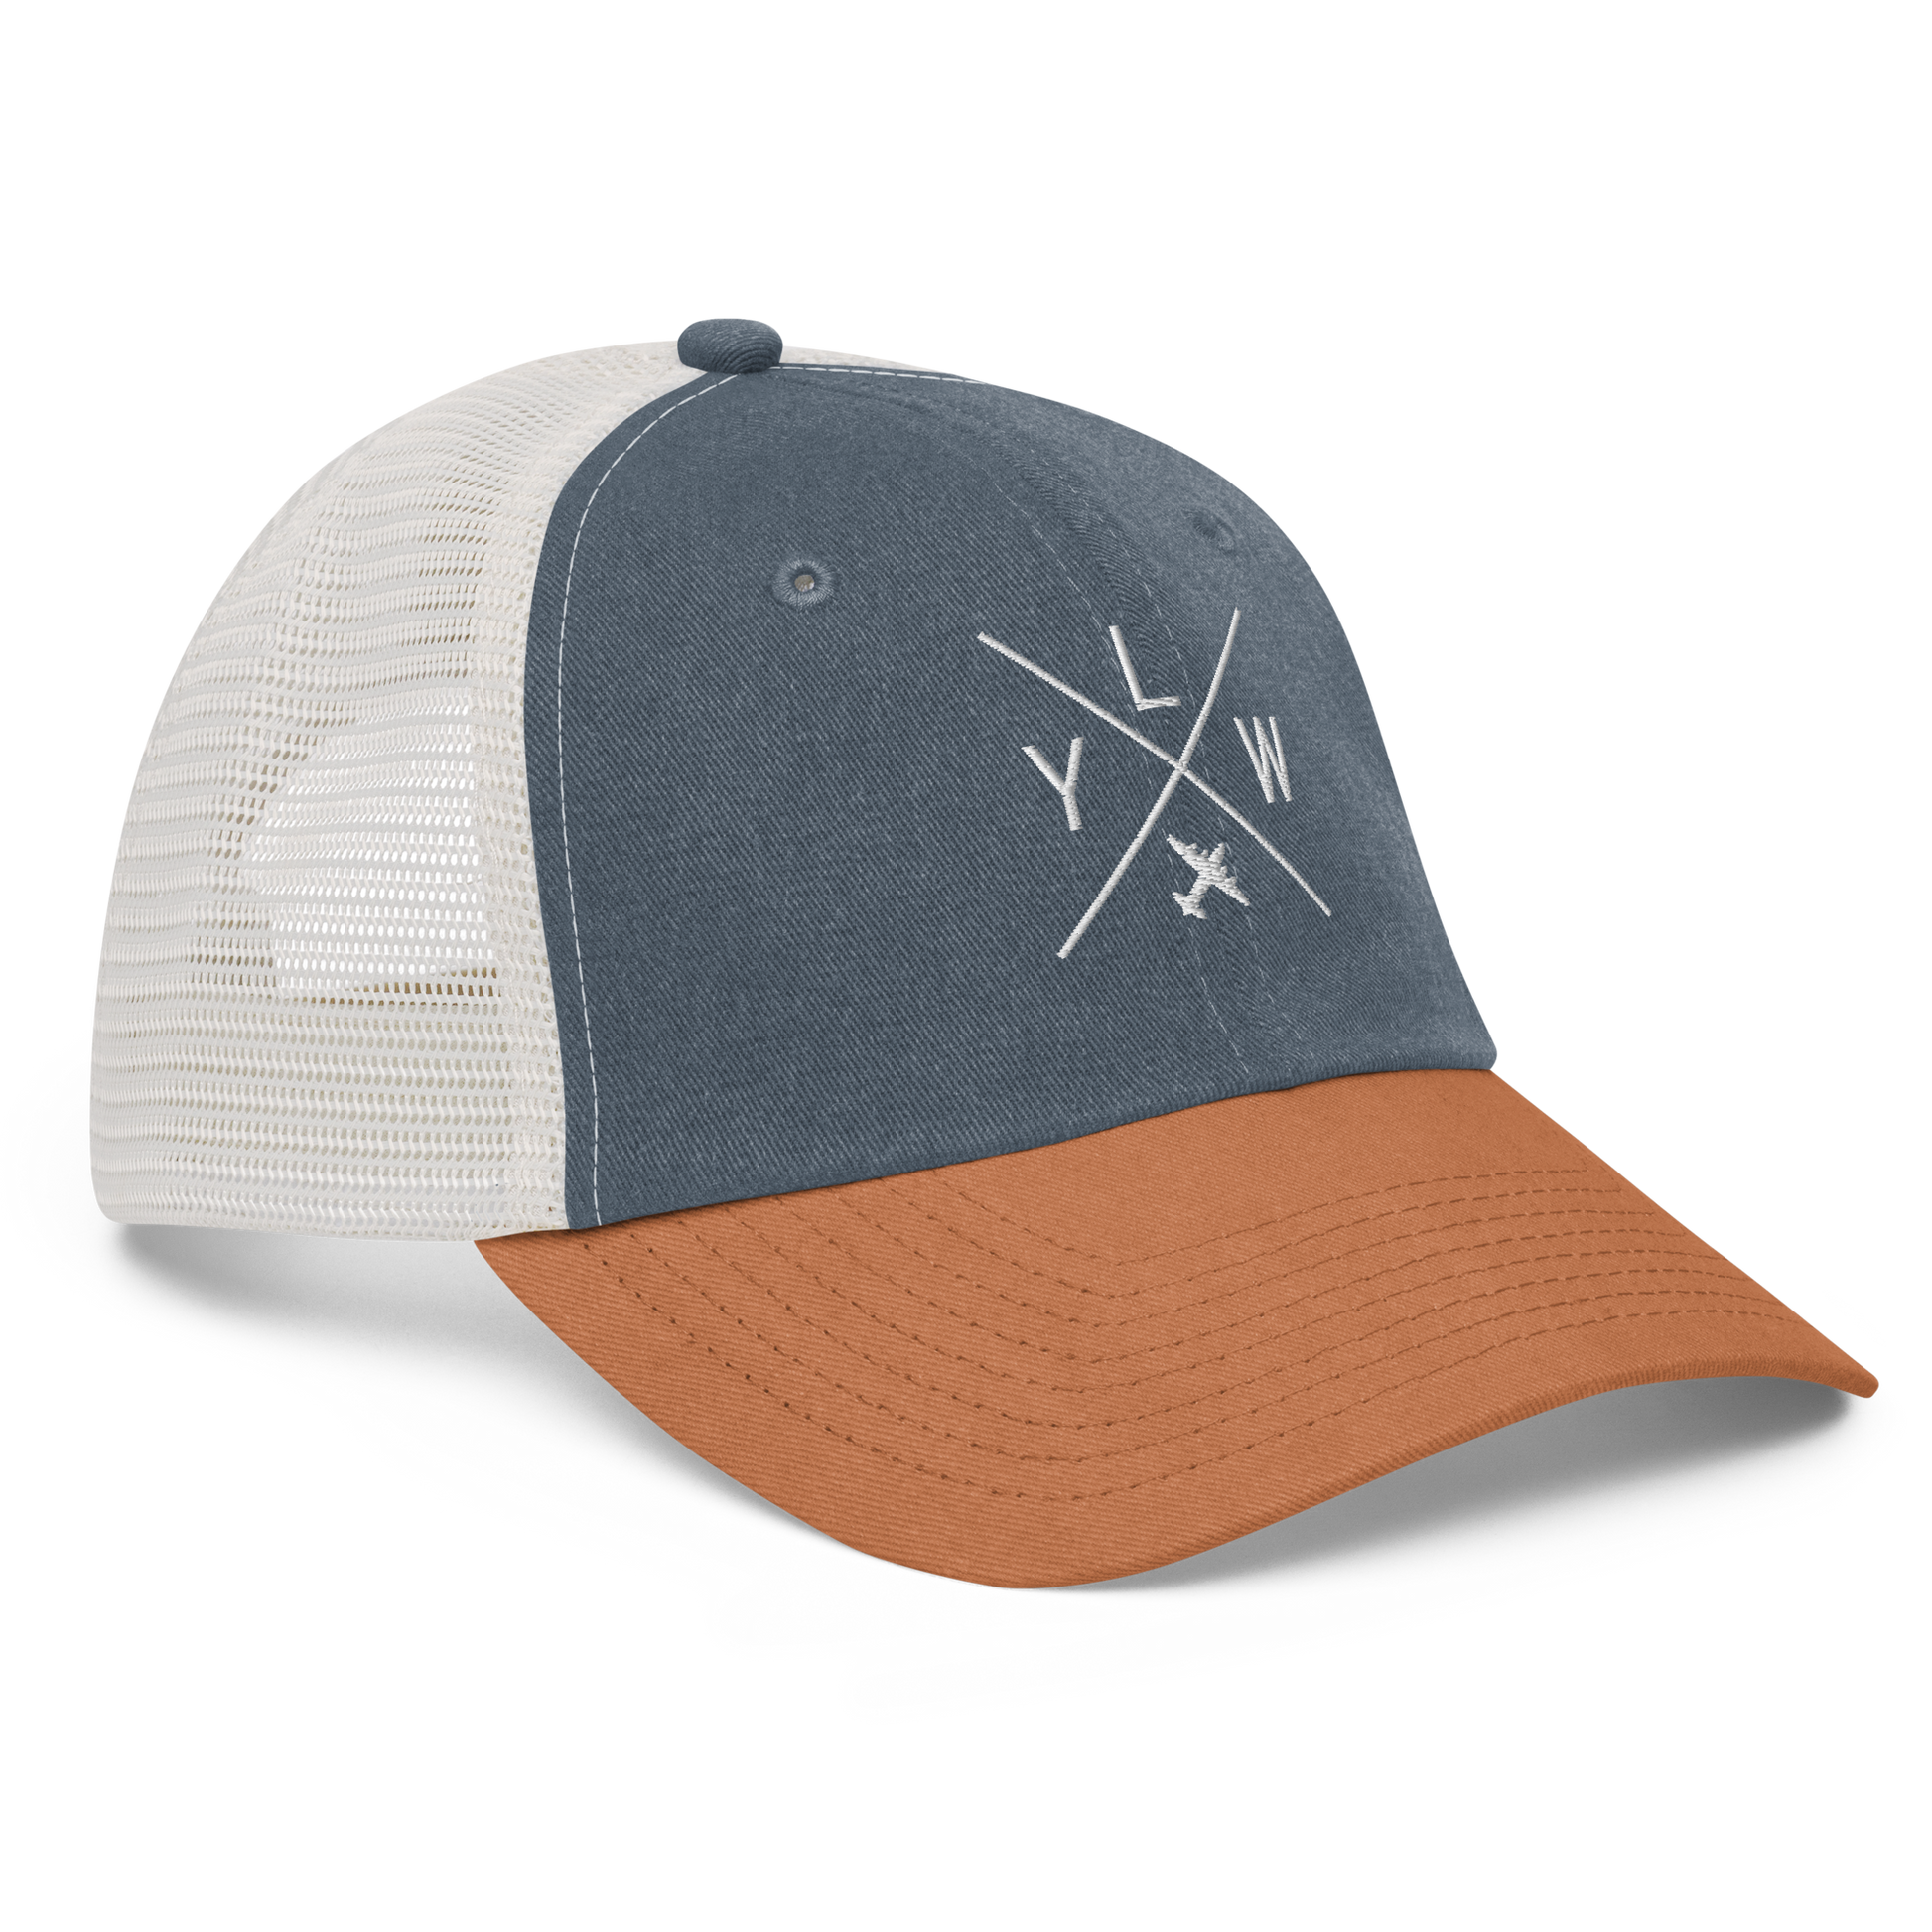 YHM Designs - YLW Kelowna Pigment-Dyed Trucker Cap - Crossed-X Design with Airport Code and Vintage Propliner - White Embroidery - Image 16